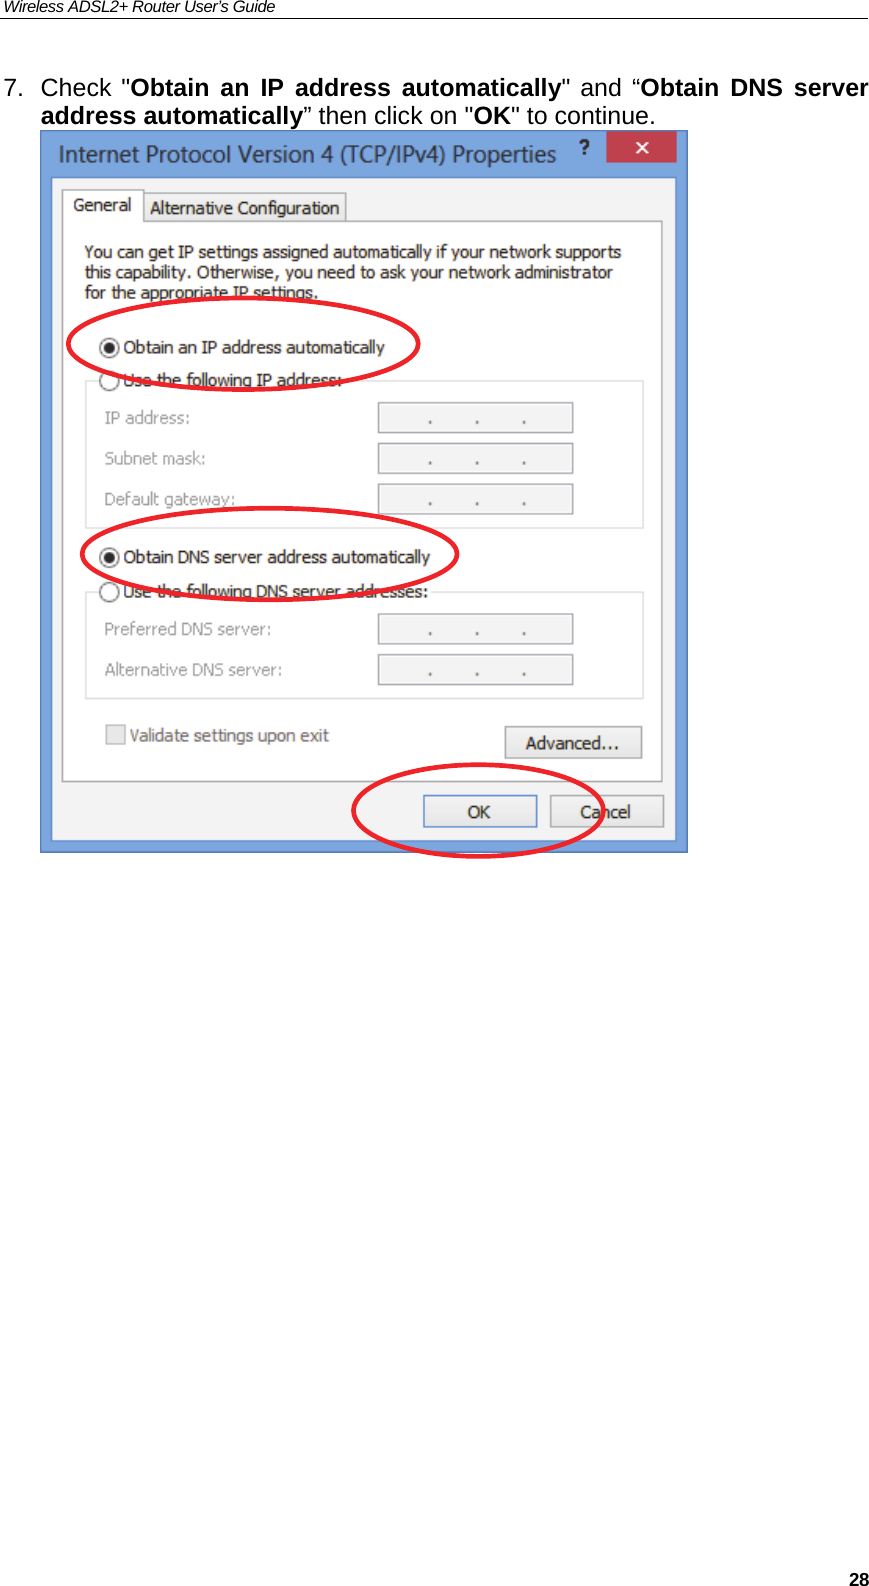 Wireless ADSL2+ Router User’s Guide     287. Check &quot;Obtain an IP address automatically&quot; and “Obtain DNS server address automatically” then click on &quot;OK&quot; to continue.                       